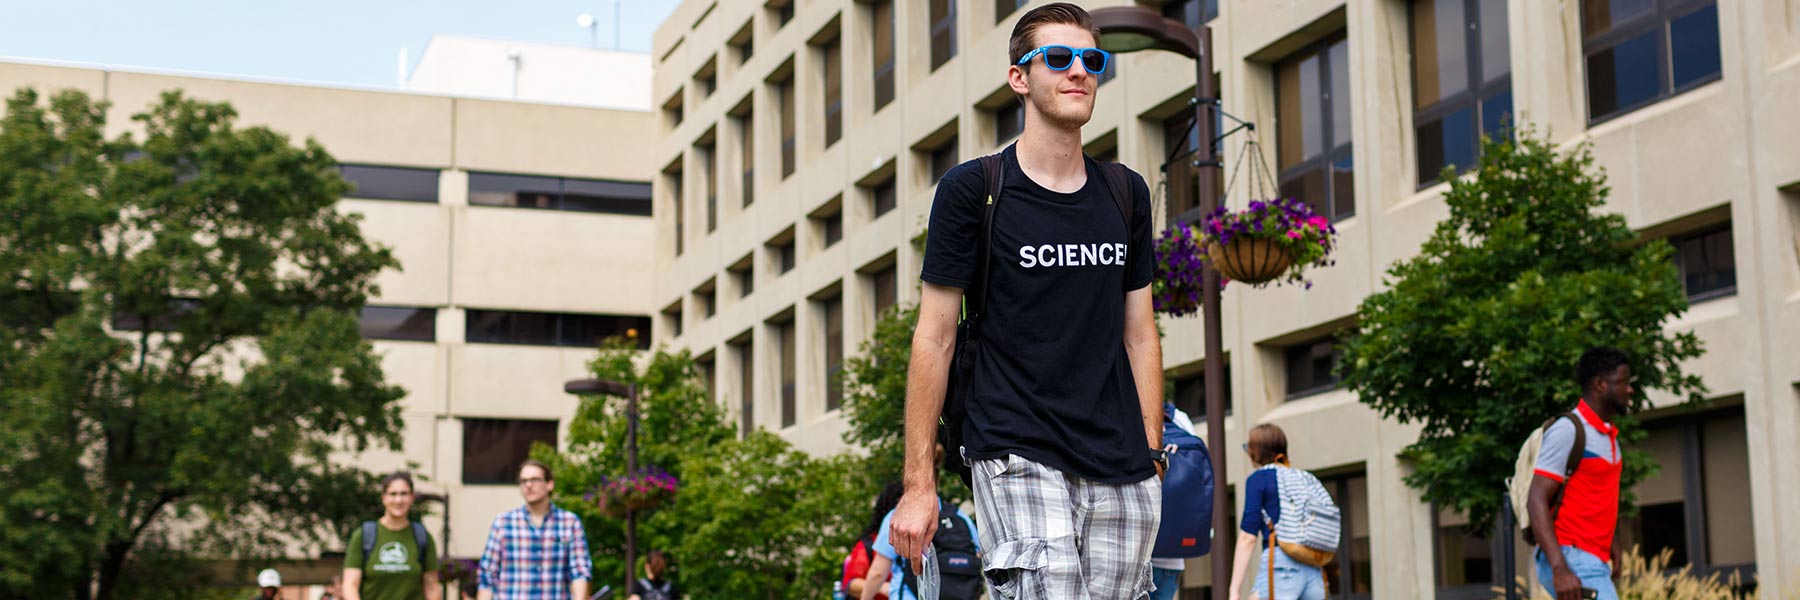 A student wearing sunglasses and a t-shirt that reads “SCIENCE” walks on campus.